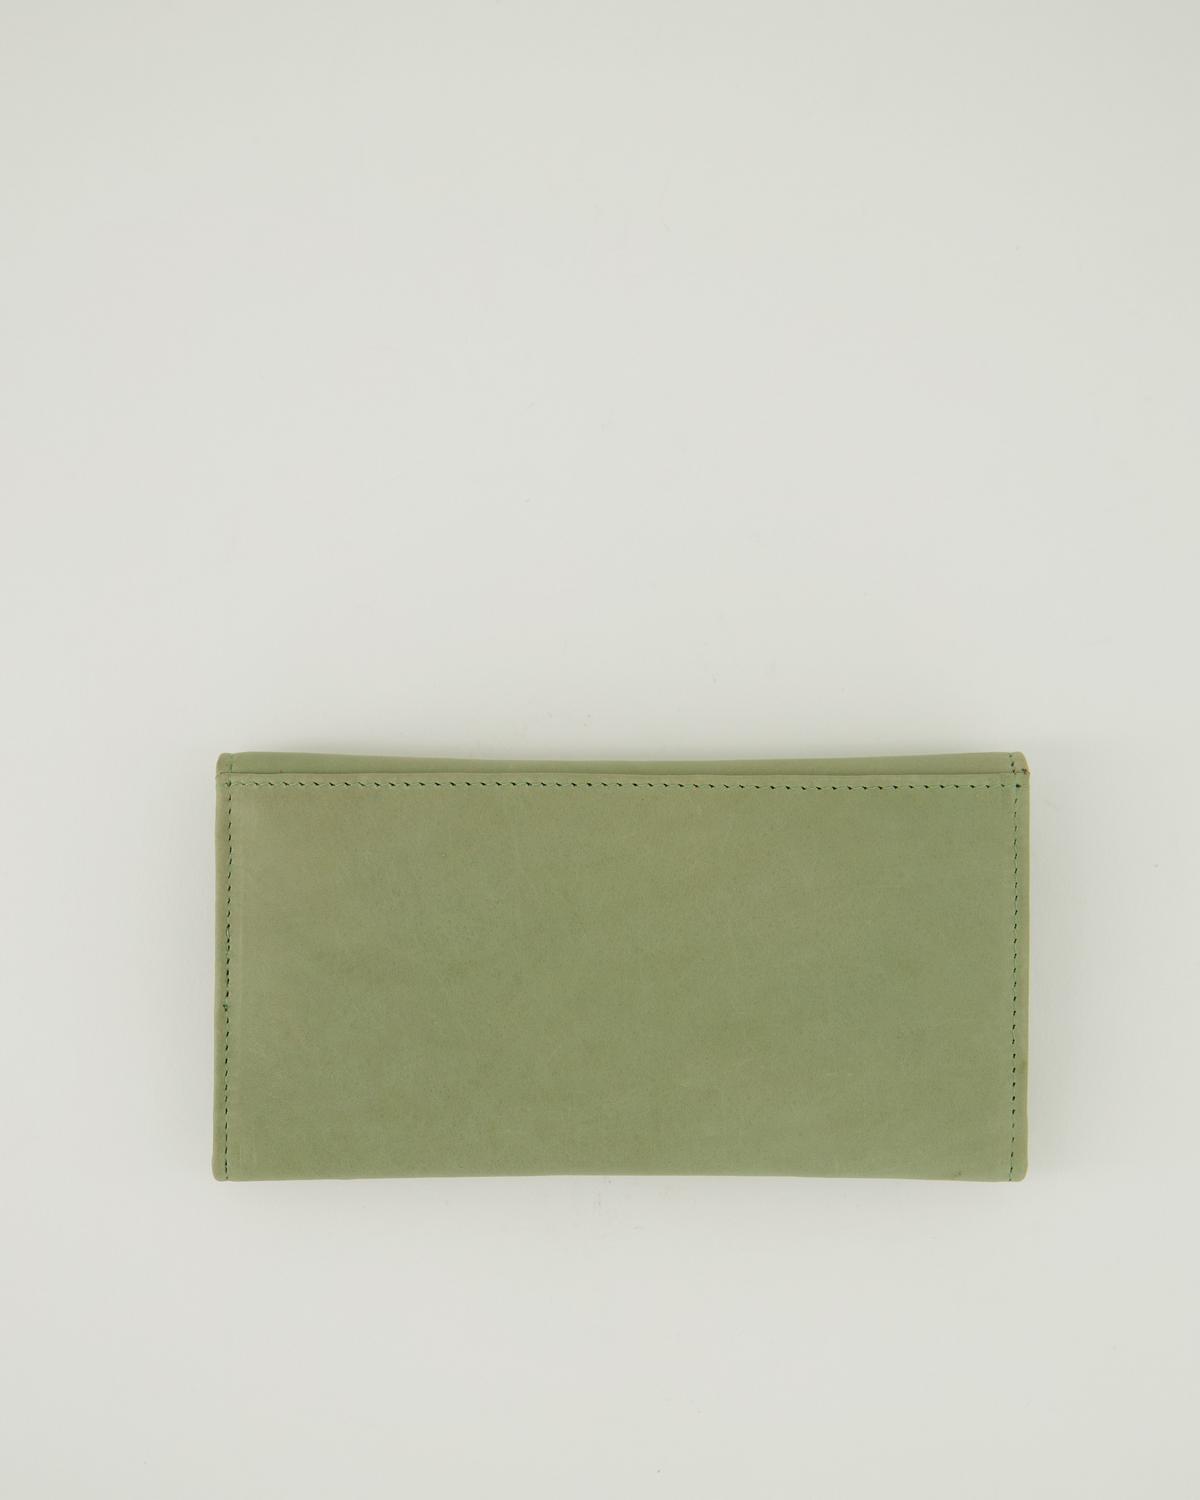 Sonia Structured Leather Wallet - Poetry Clothing Store